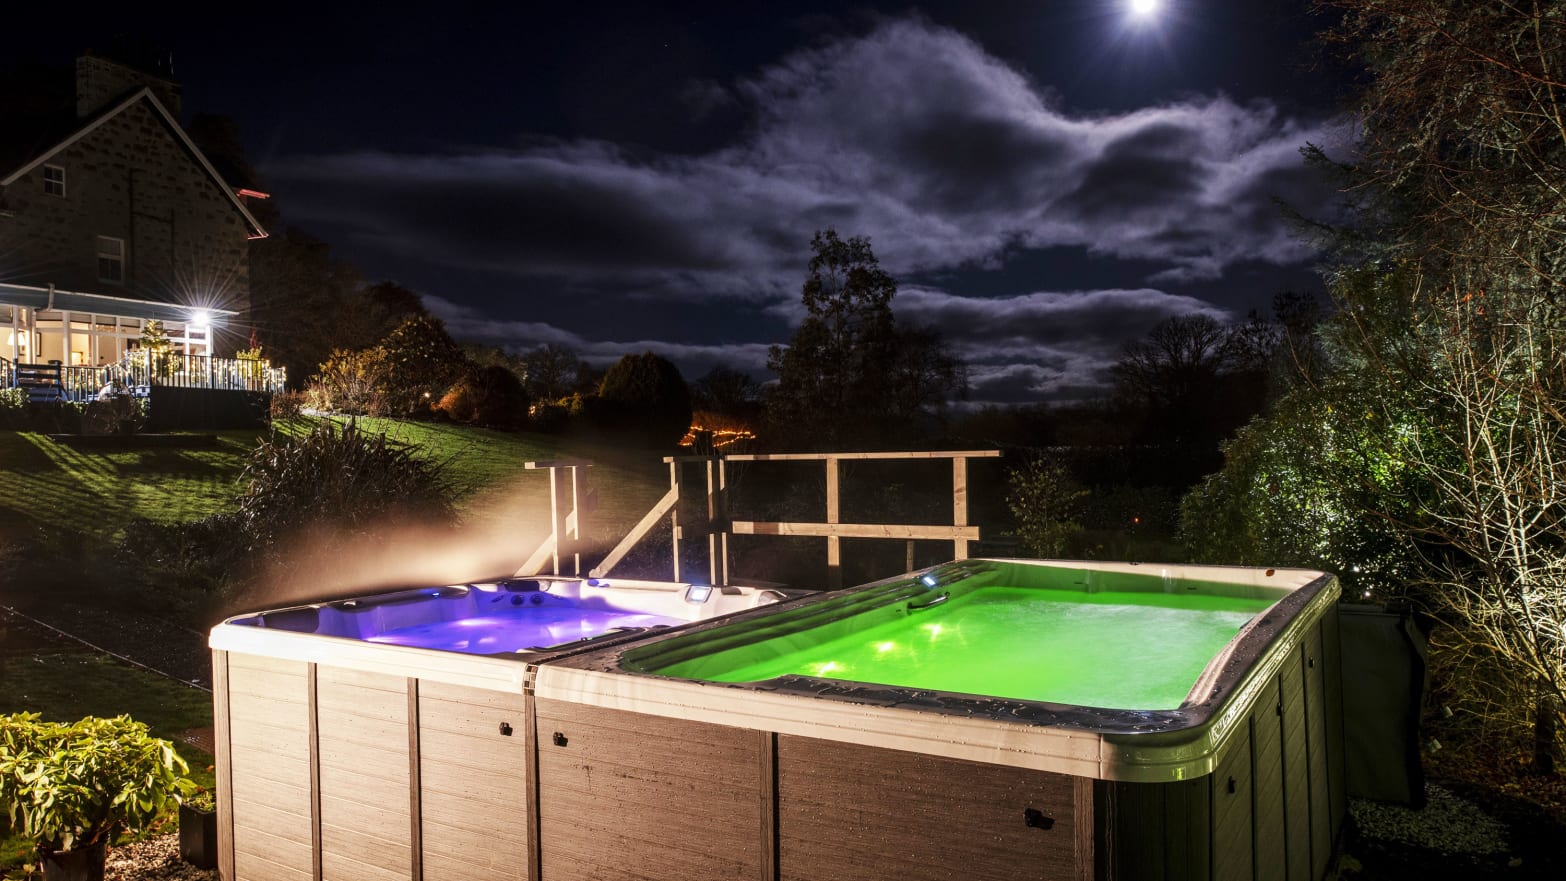 A photo including a hot tub and dark skies 